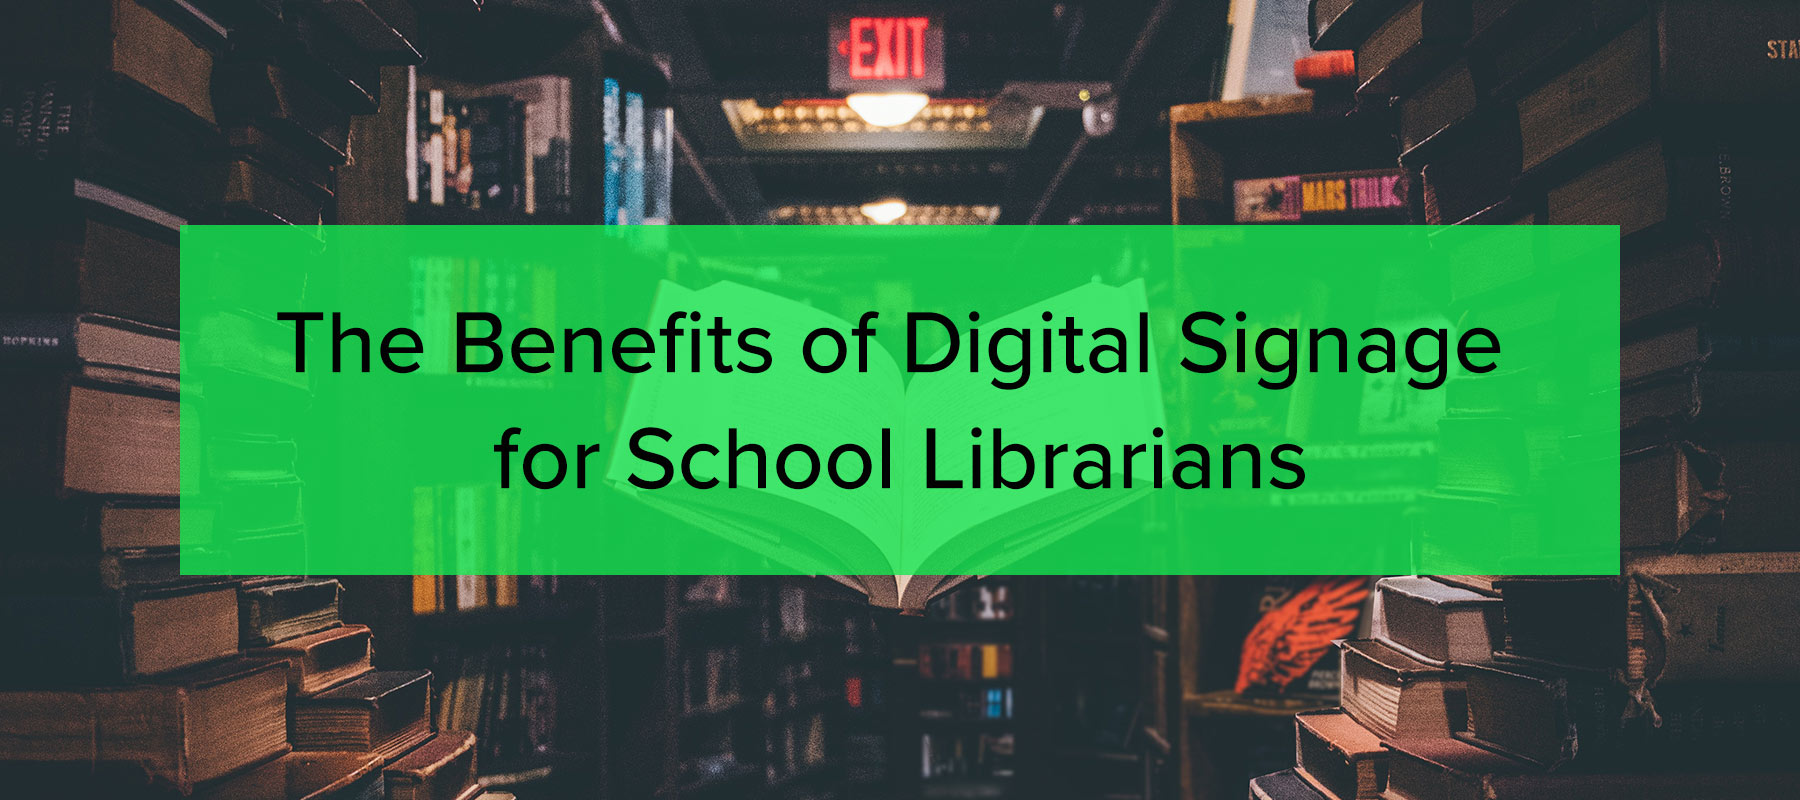 The Benefits of Digital Signage for School Librarians